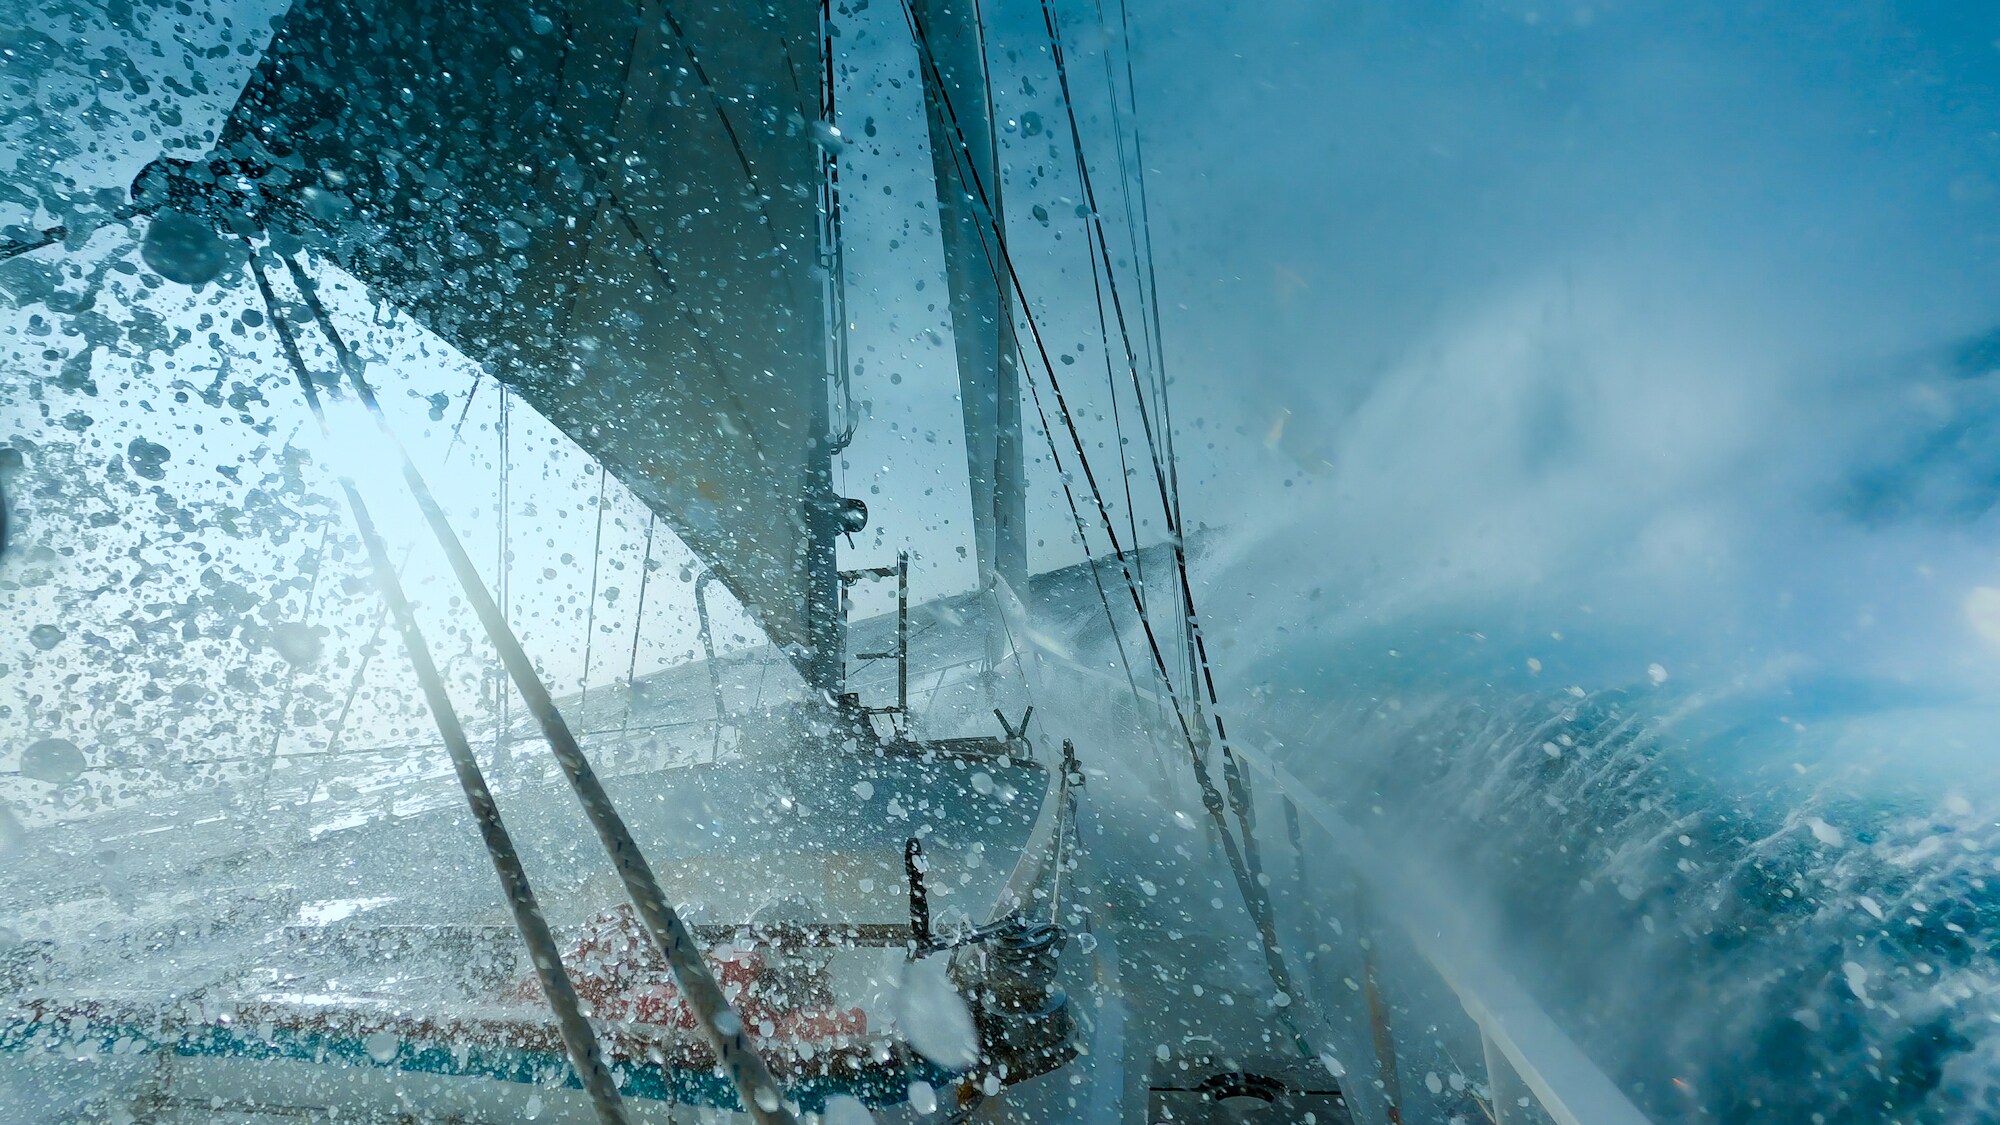 The crews ship braving the Southern ocean to reach their destination. (Credit: National Geographic/Bertie Gregory for Disney+)